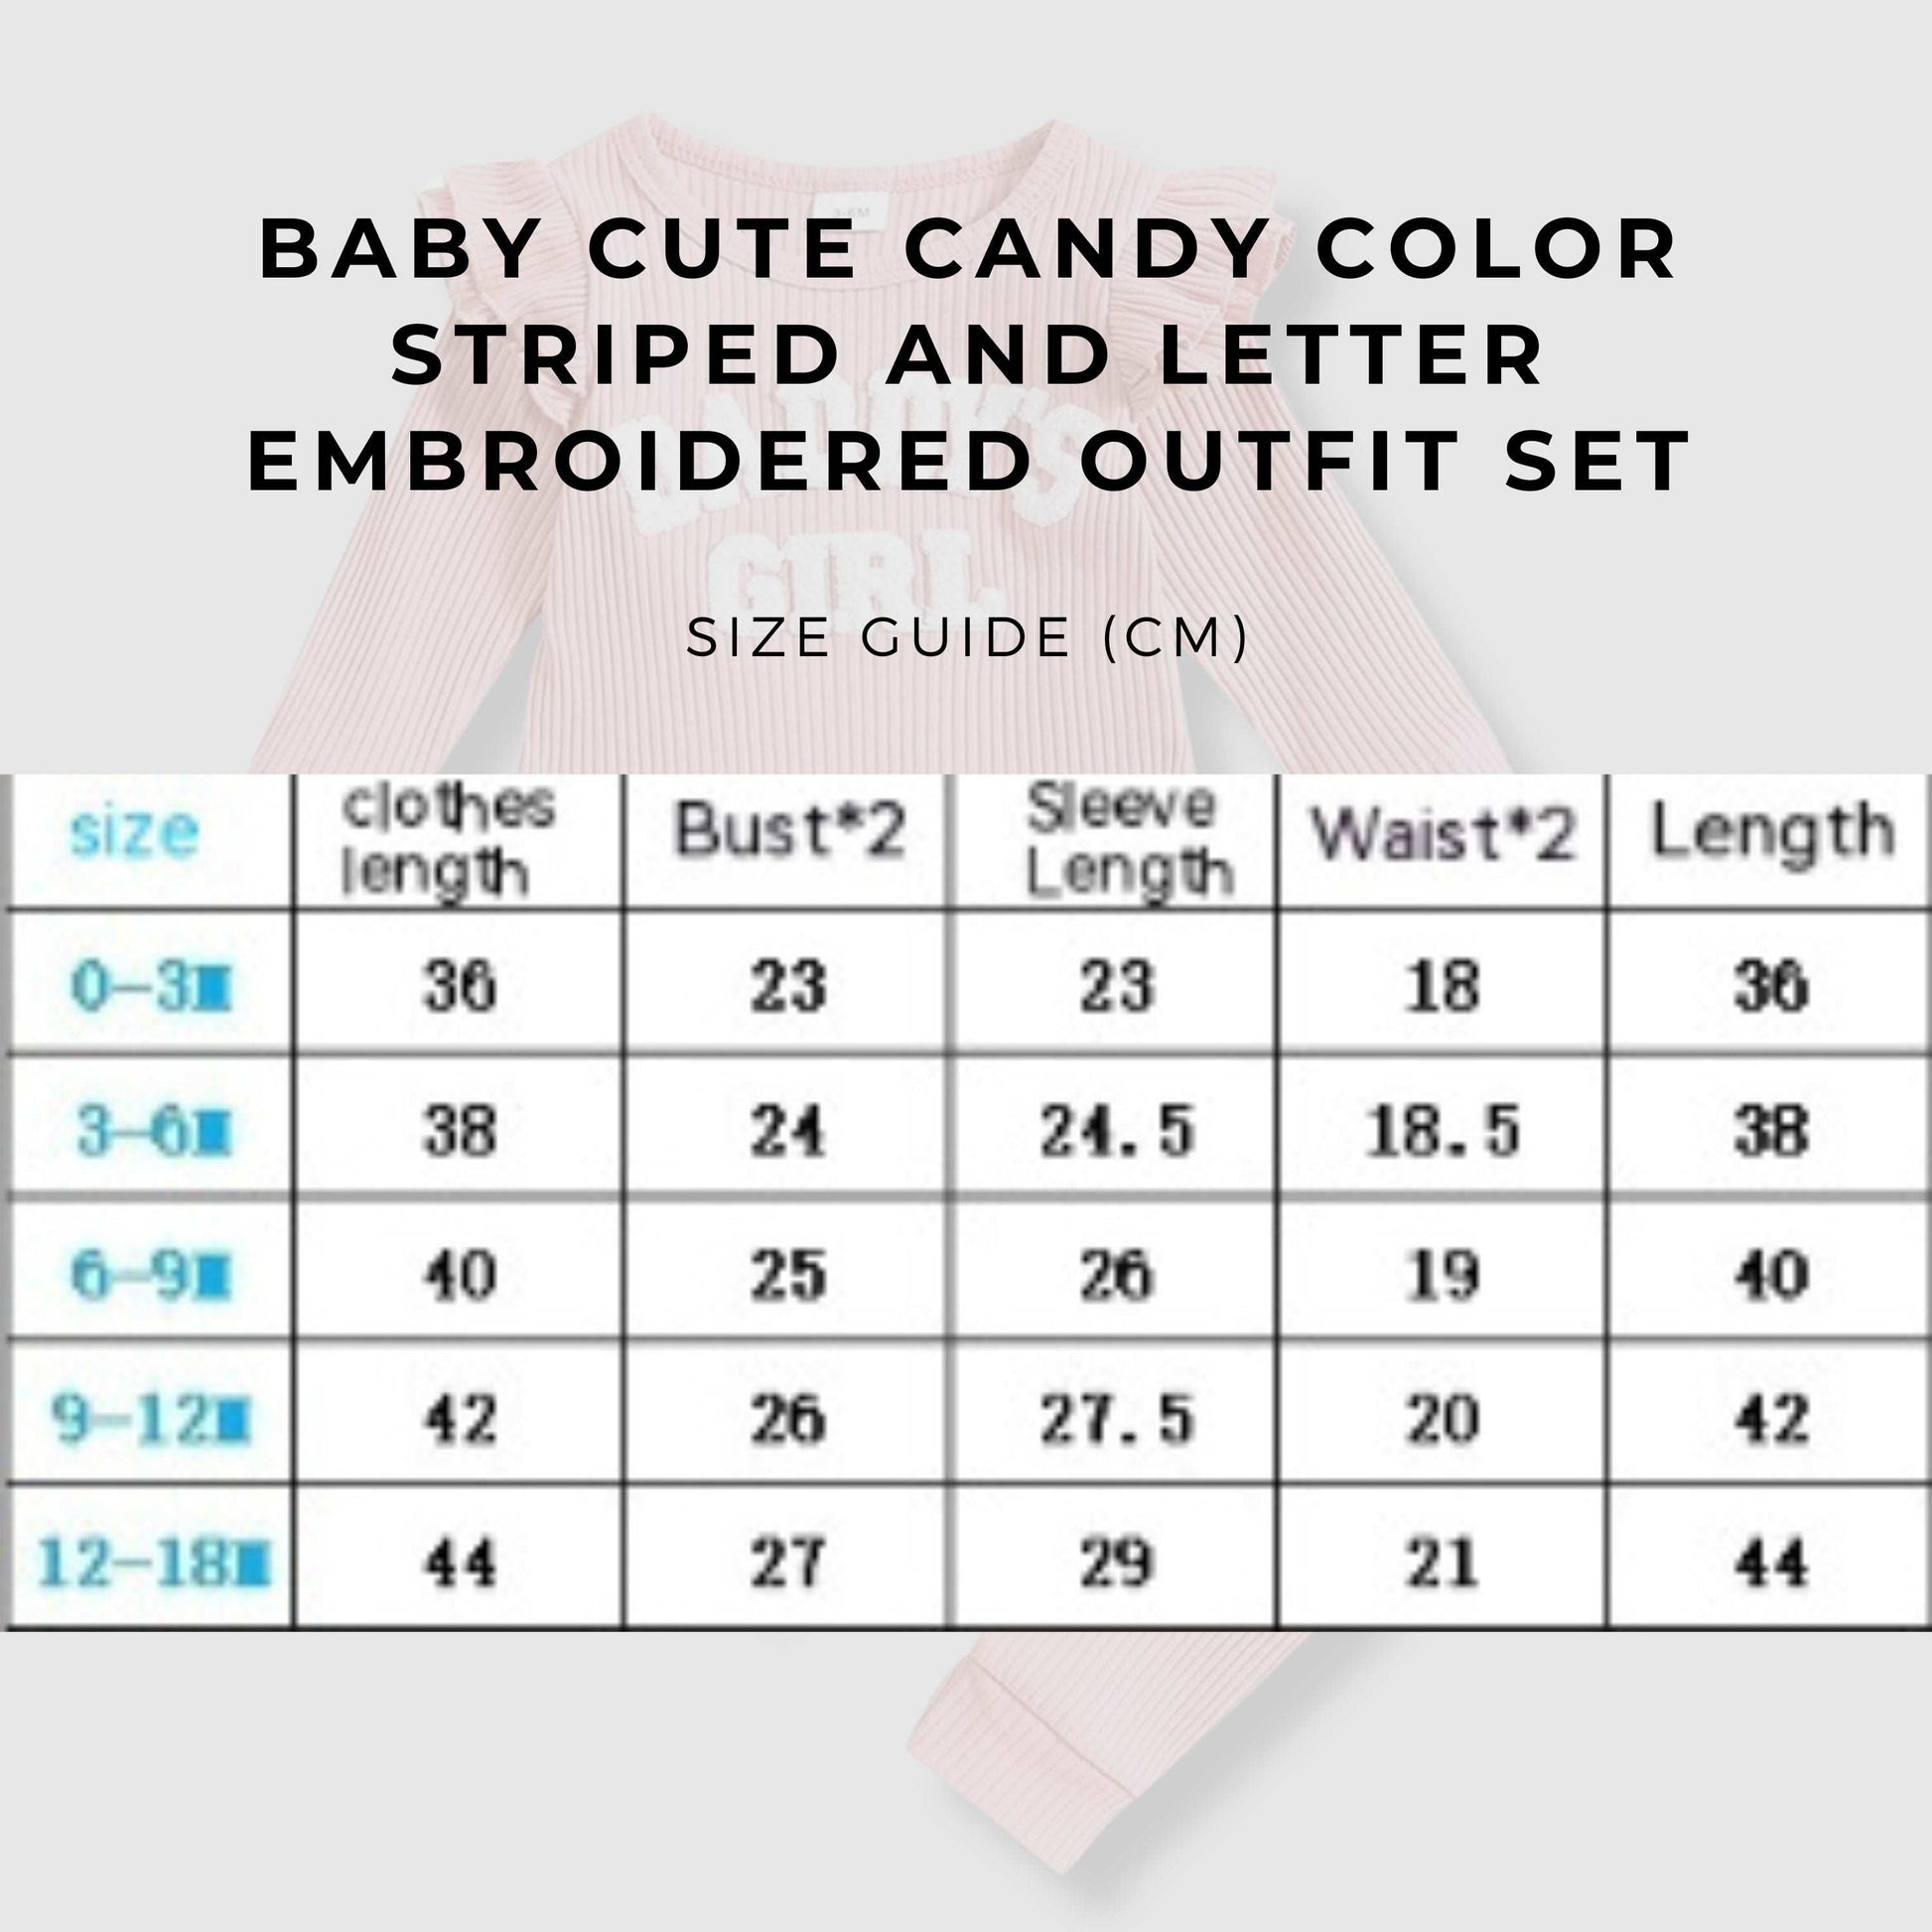 Baby Cute Candy Color Striped and Letter Embroidered Outfit Set size